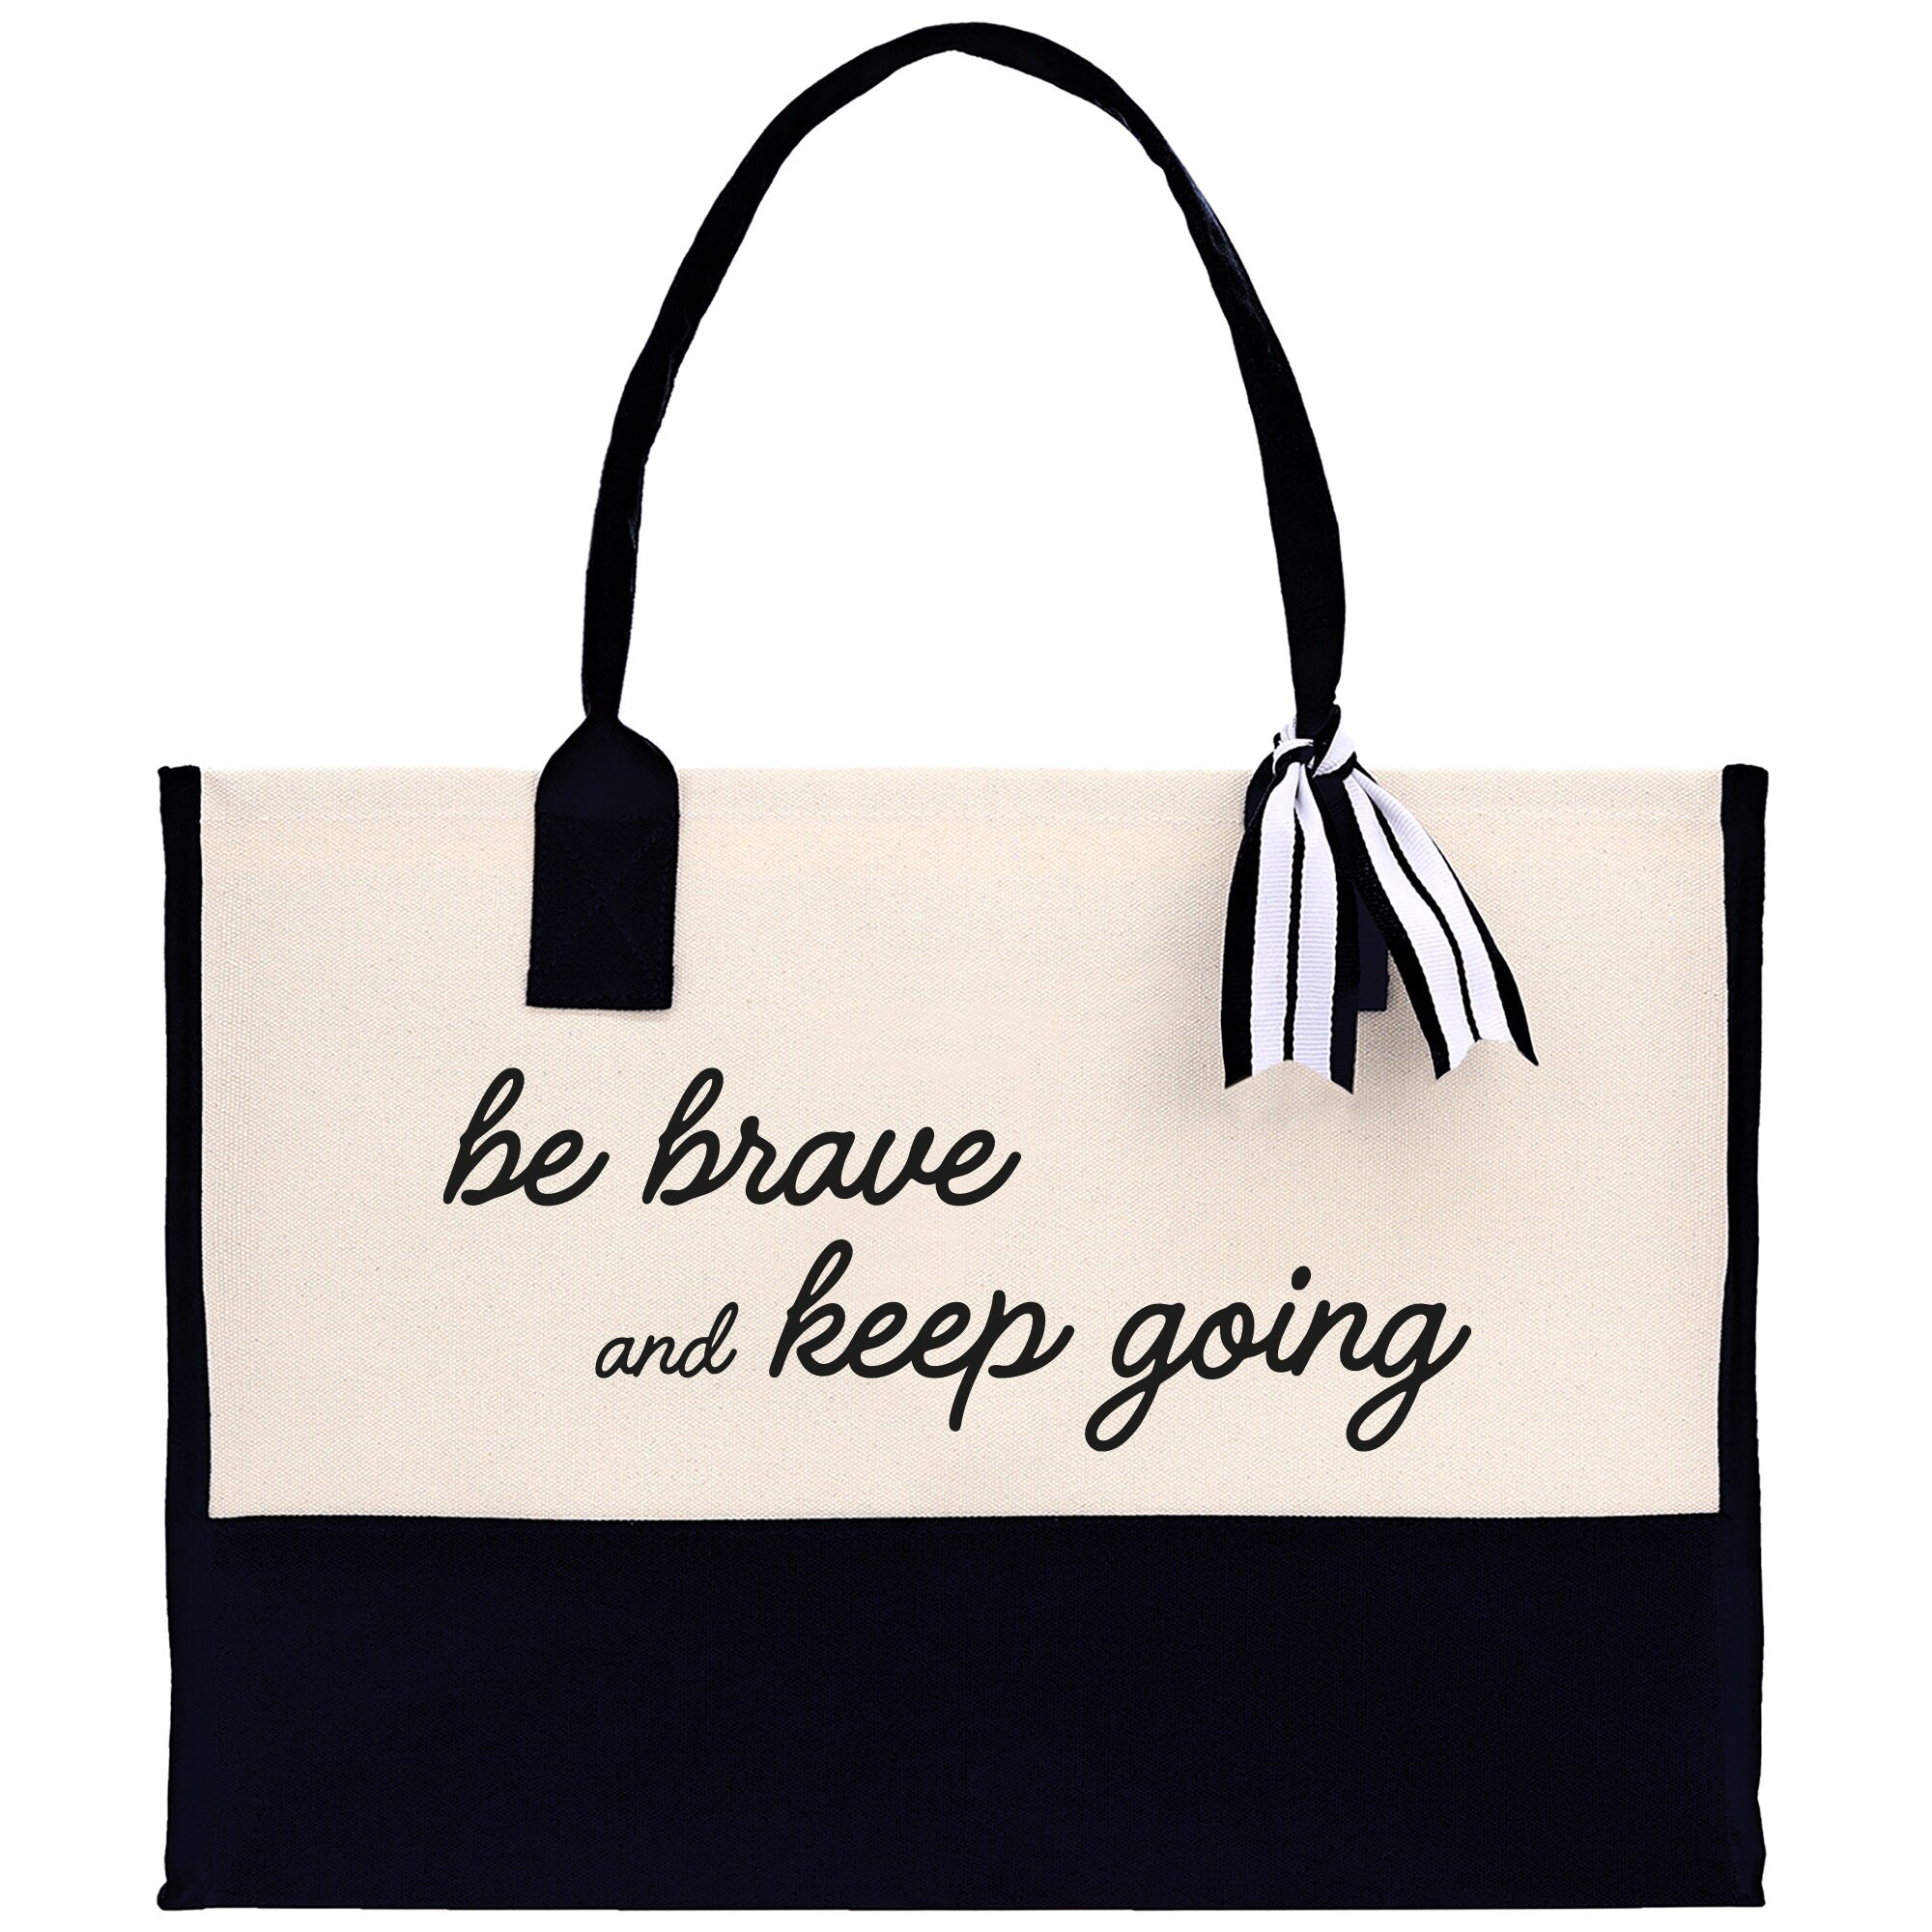 Be Brave And Keep Going Canvas Tote Bag Birthday Gift for Her Weekender Tote Bag Beach Tote Bag Large Beach Tote Bag